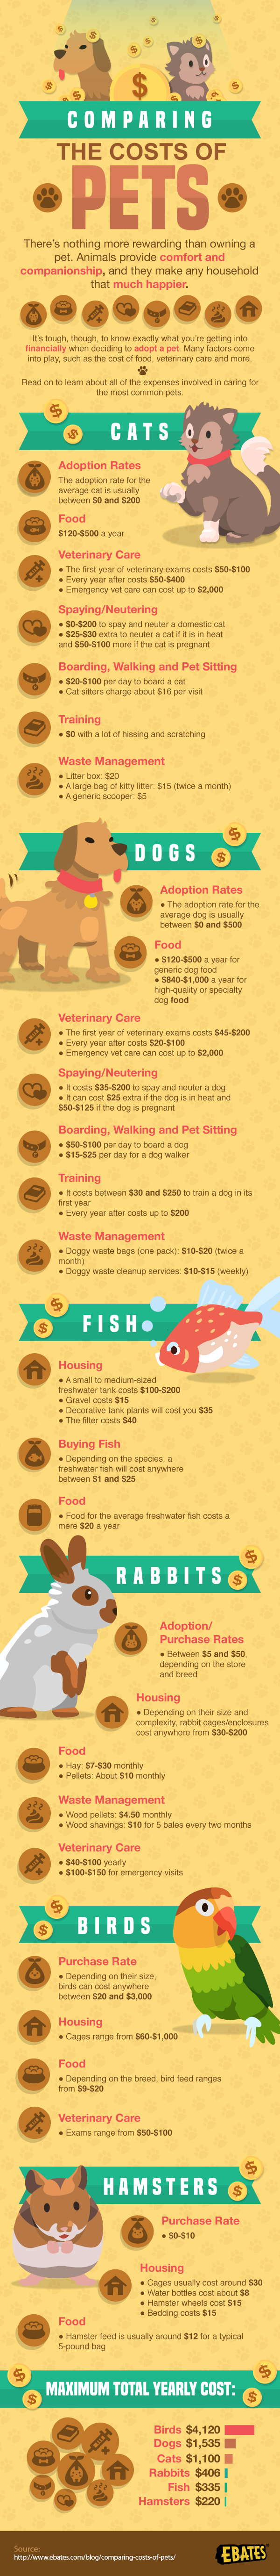 Comparing the Costs of Pets - Ebates